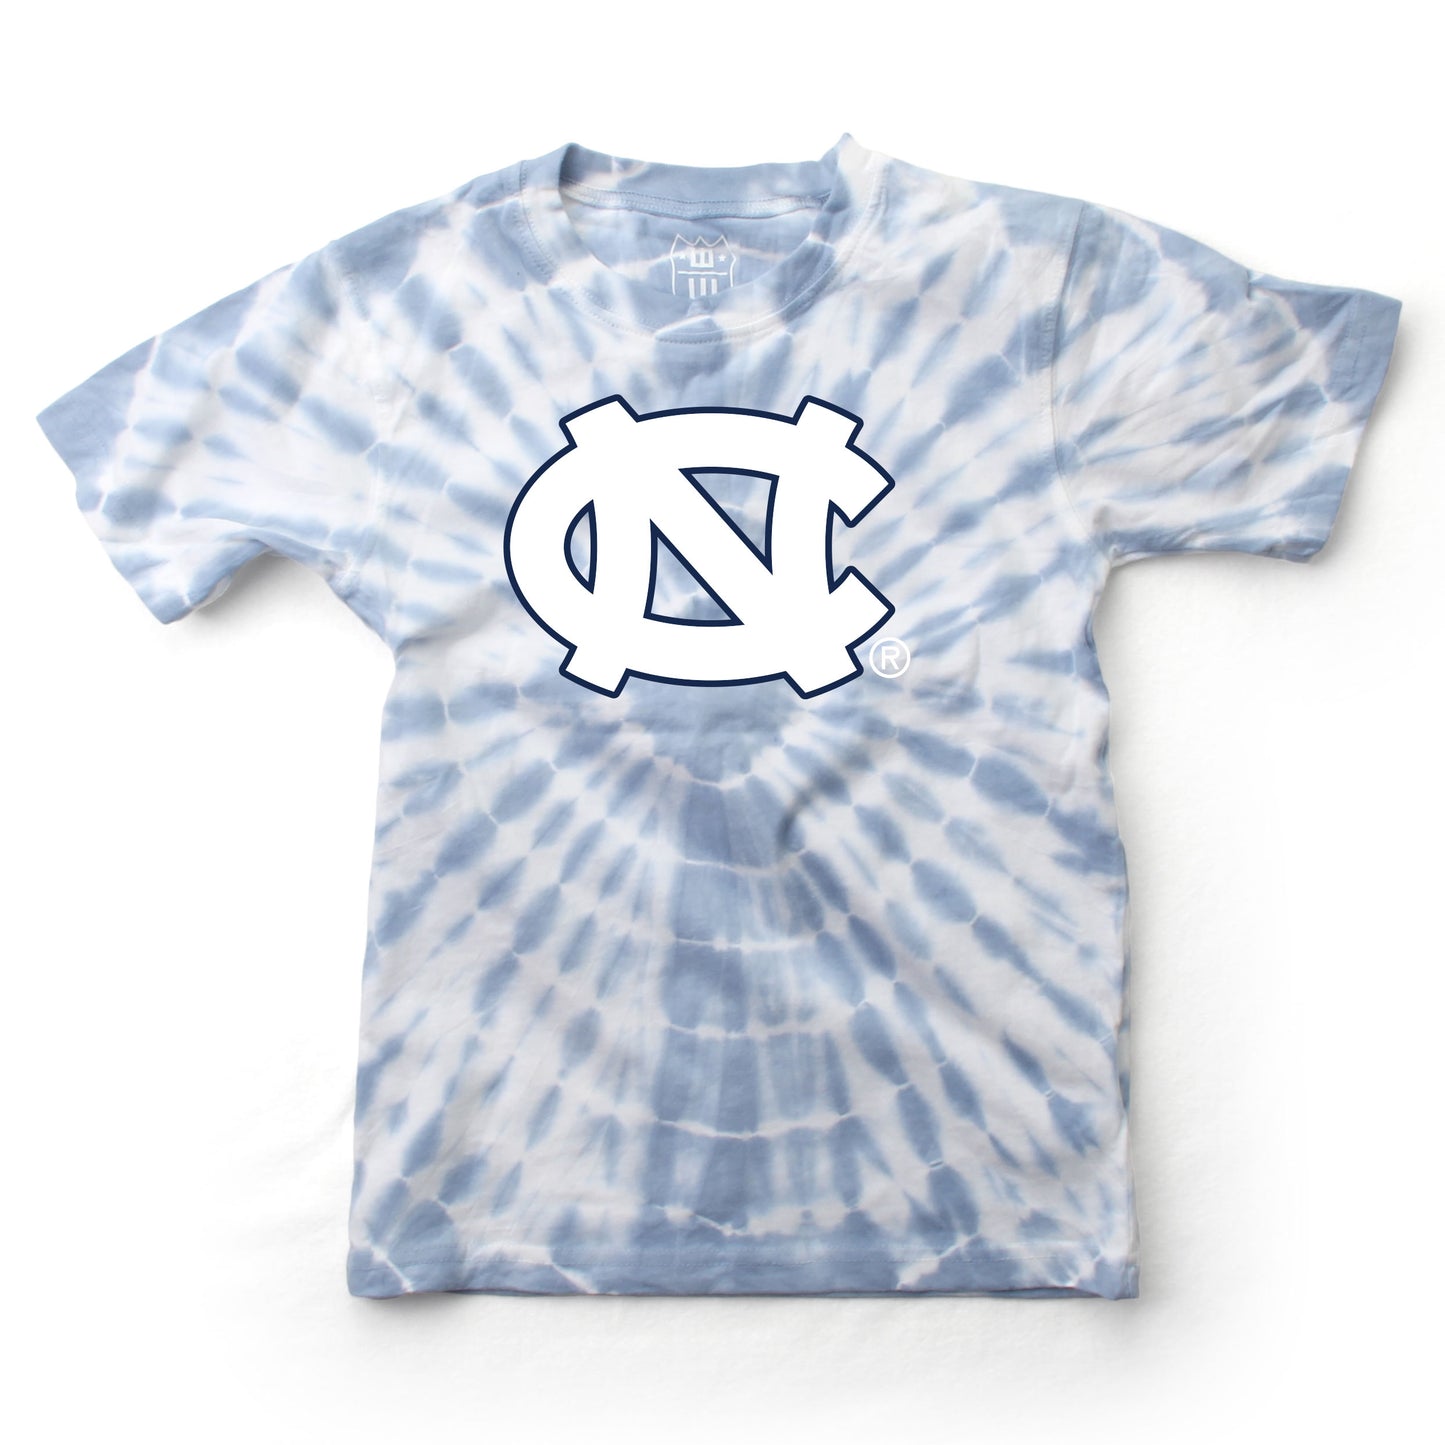 North Carolina Tar Heels Wes and Willy Youth College Team Tie Dye T-Shirt